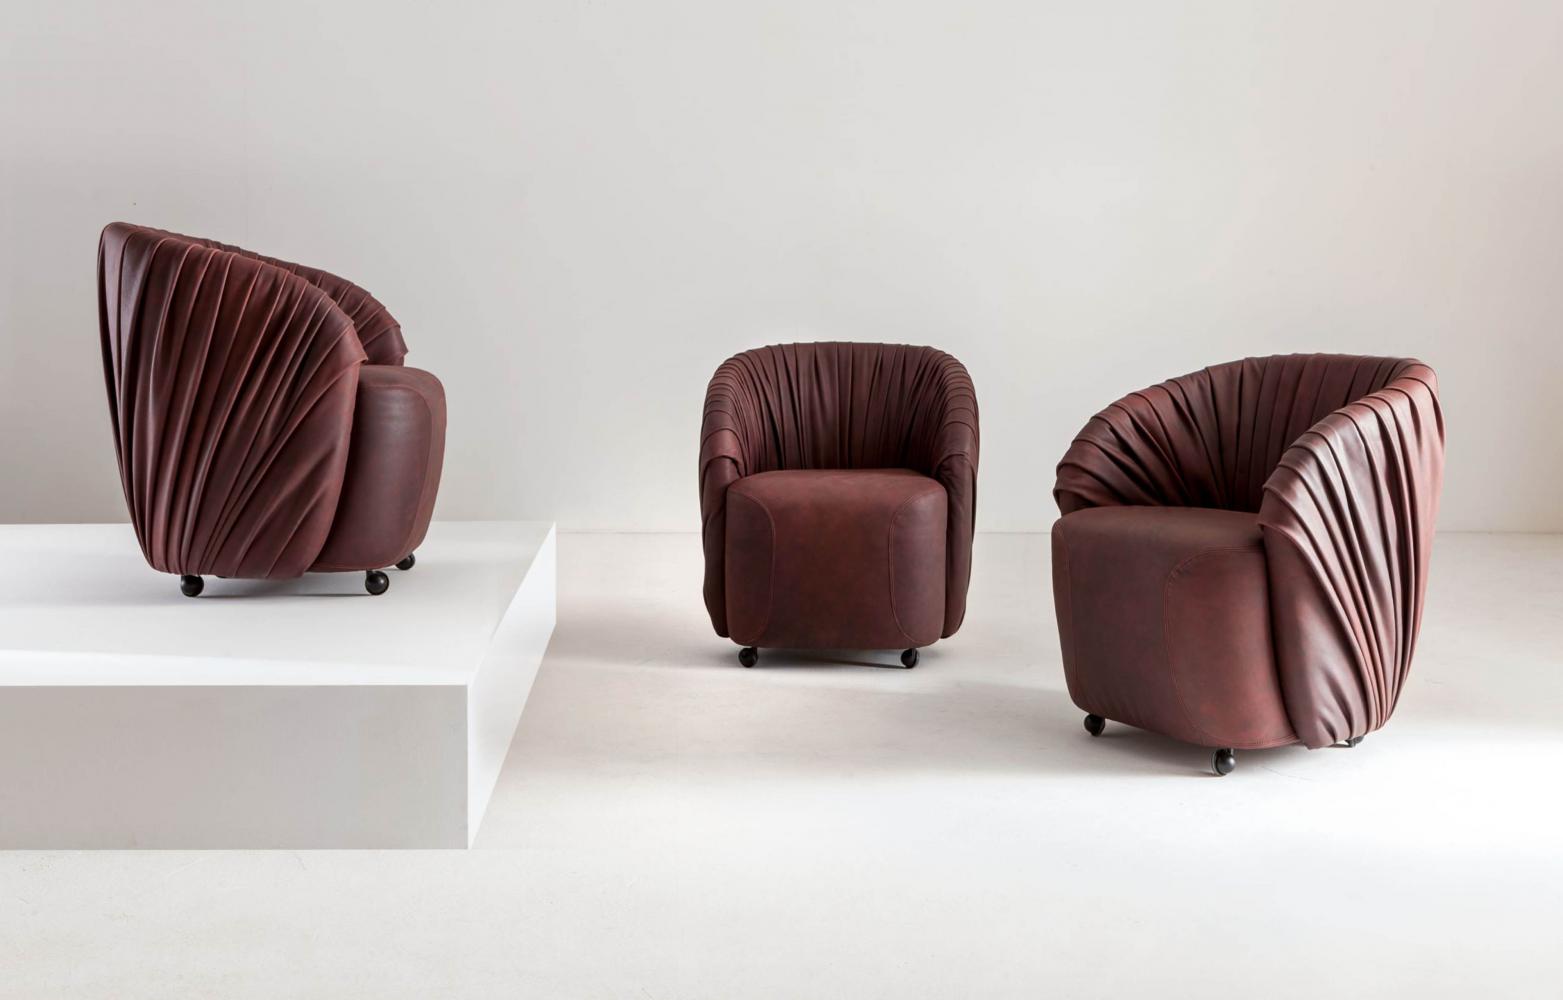 laurameroni burgundy red made to measure furniture and sofas